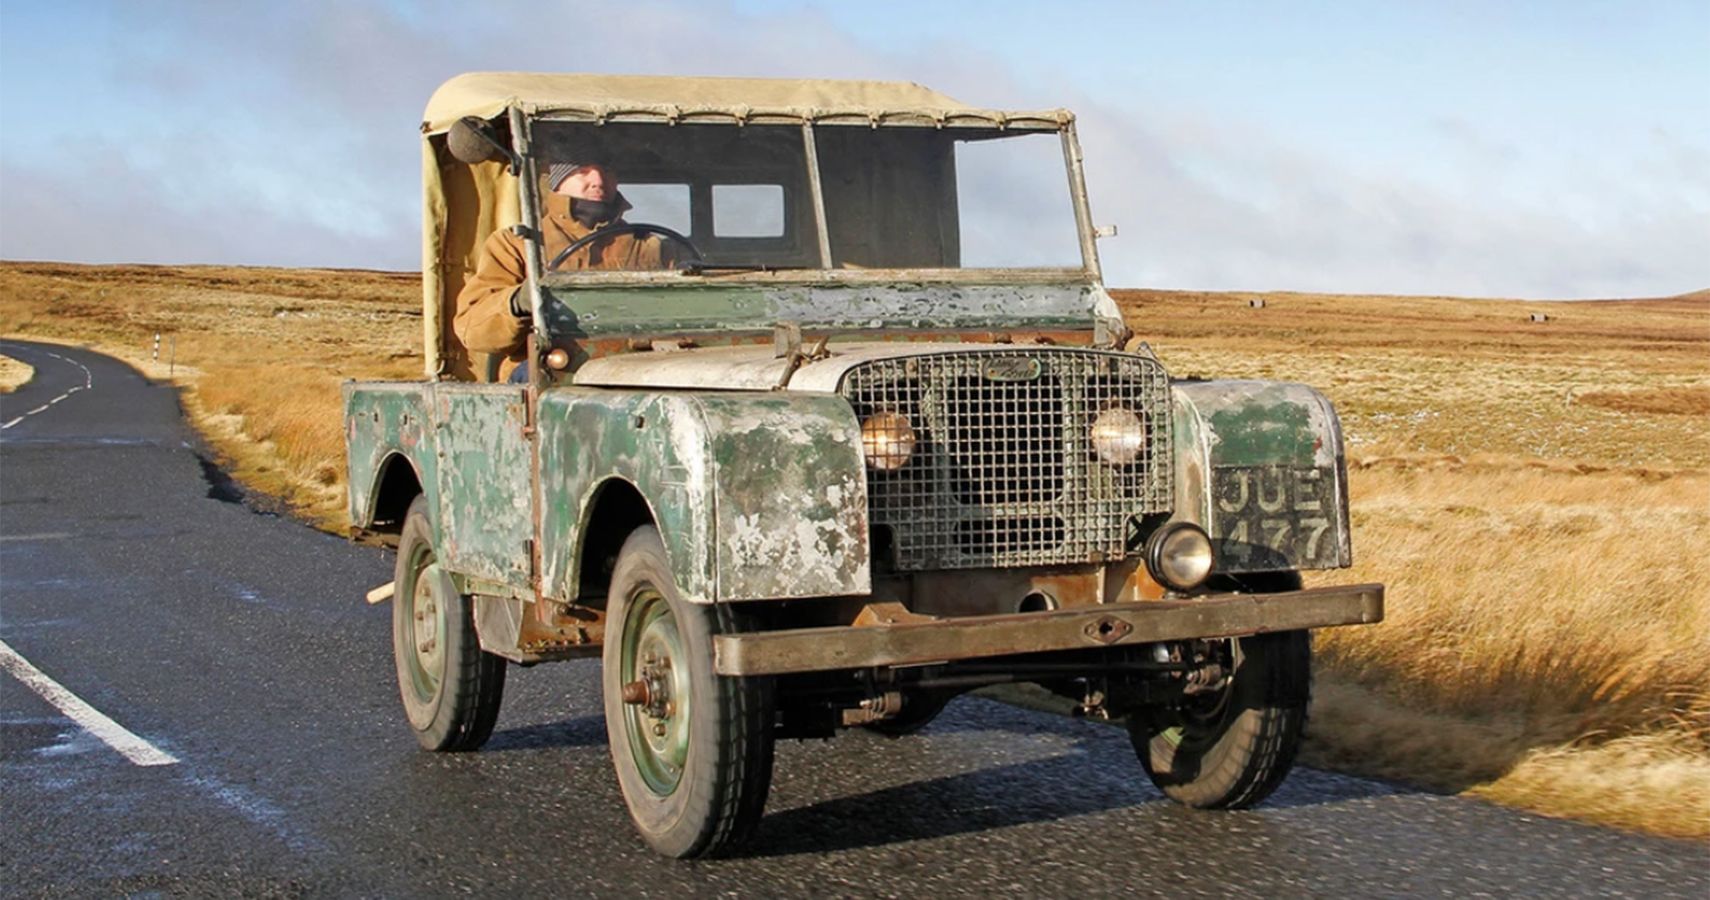 restored Land Rover JUE 477 on road